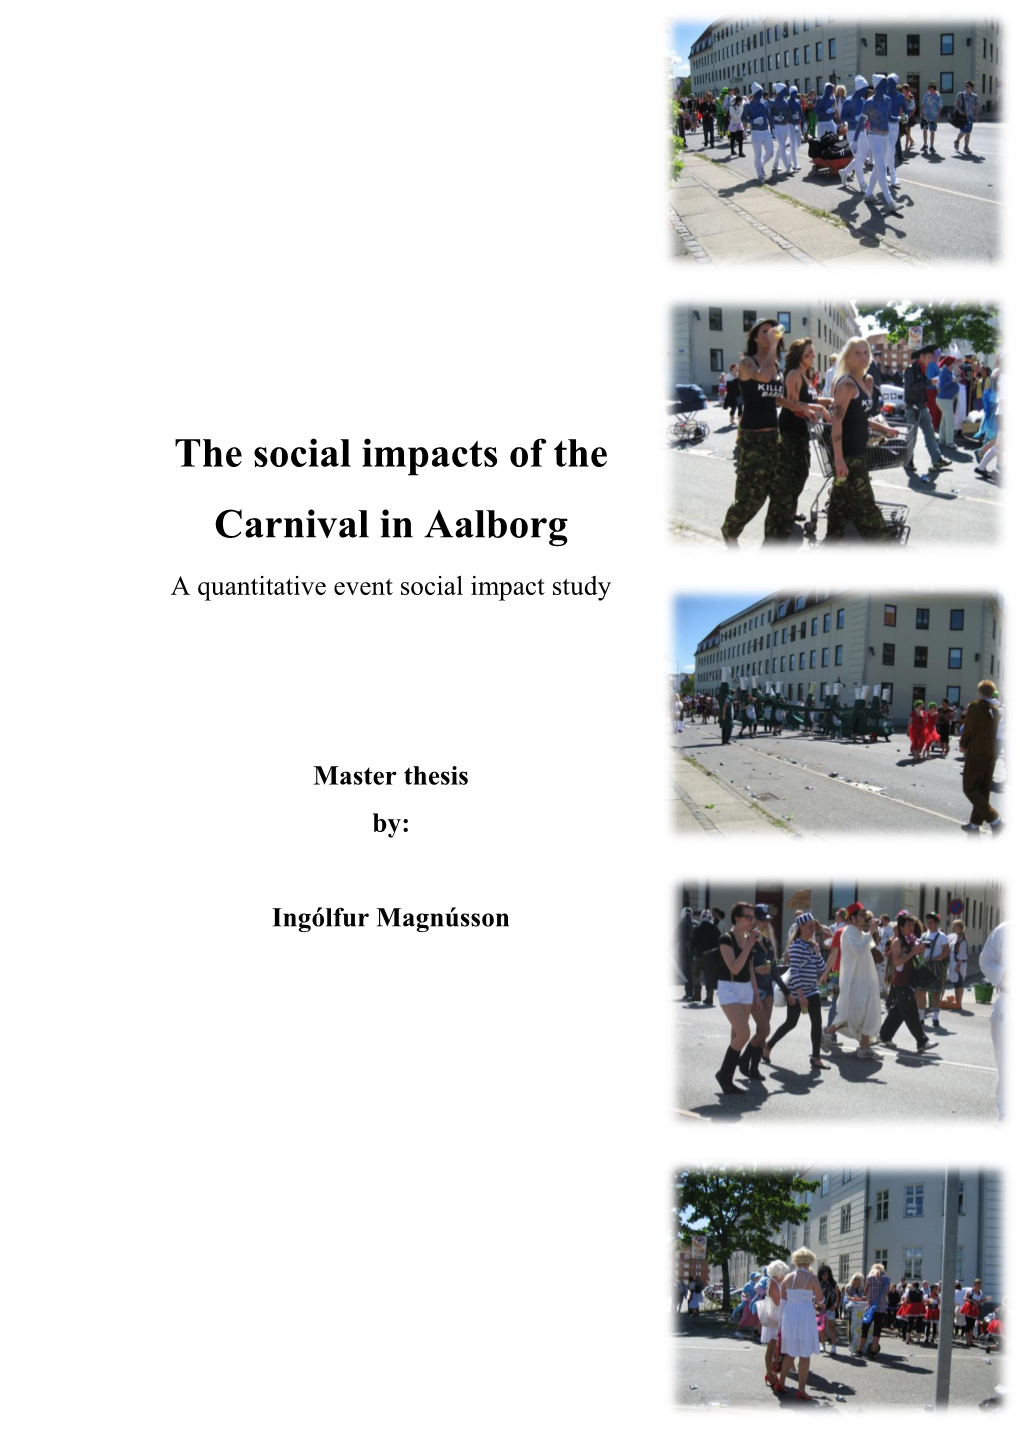 The Social Impacts of the Carnival in Aalborg a Quantitative Event Social Impact Study